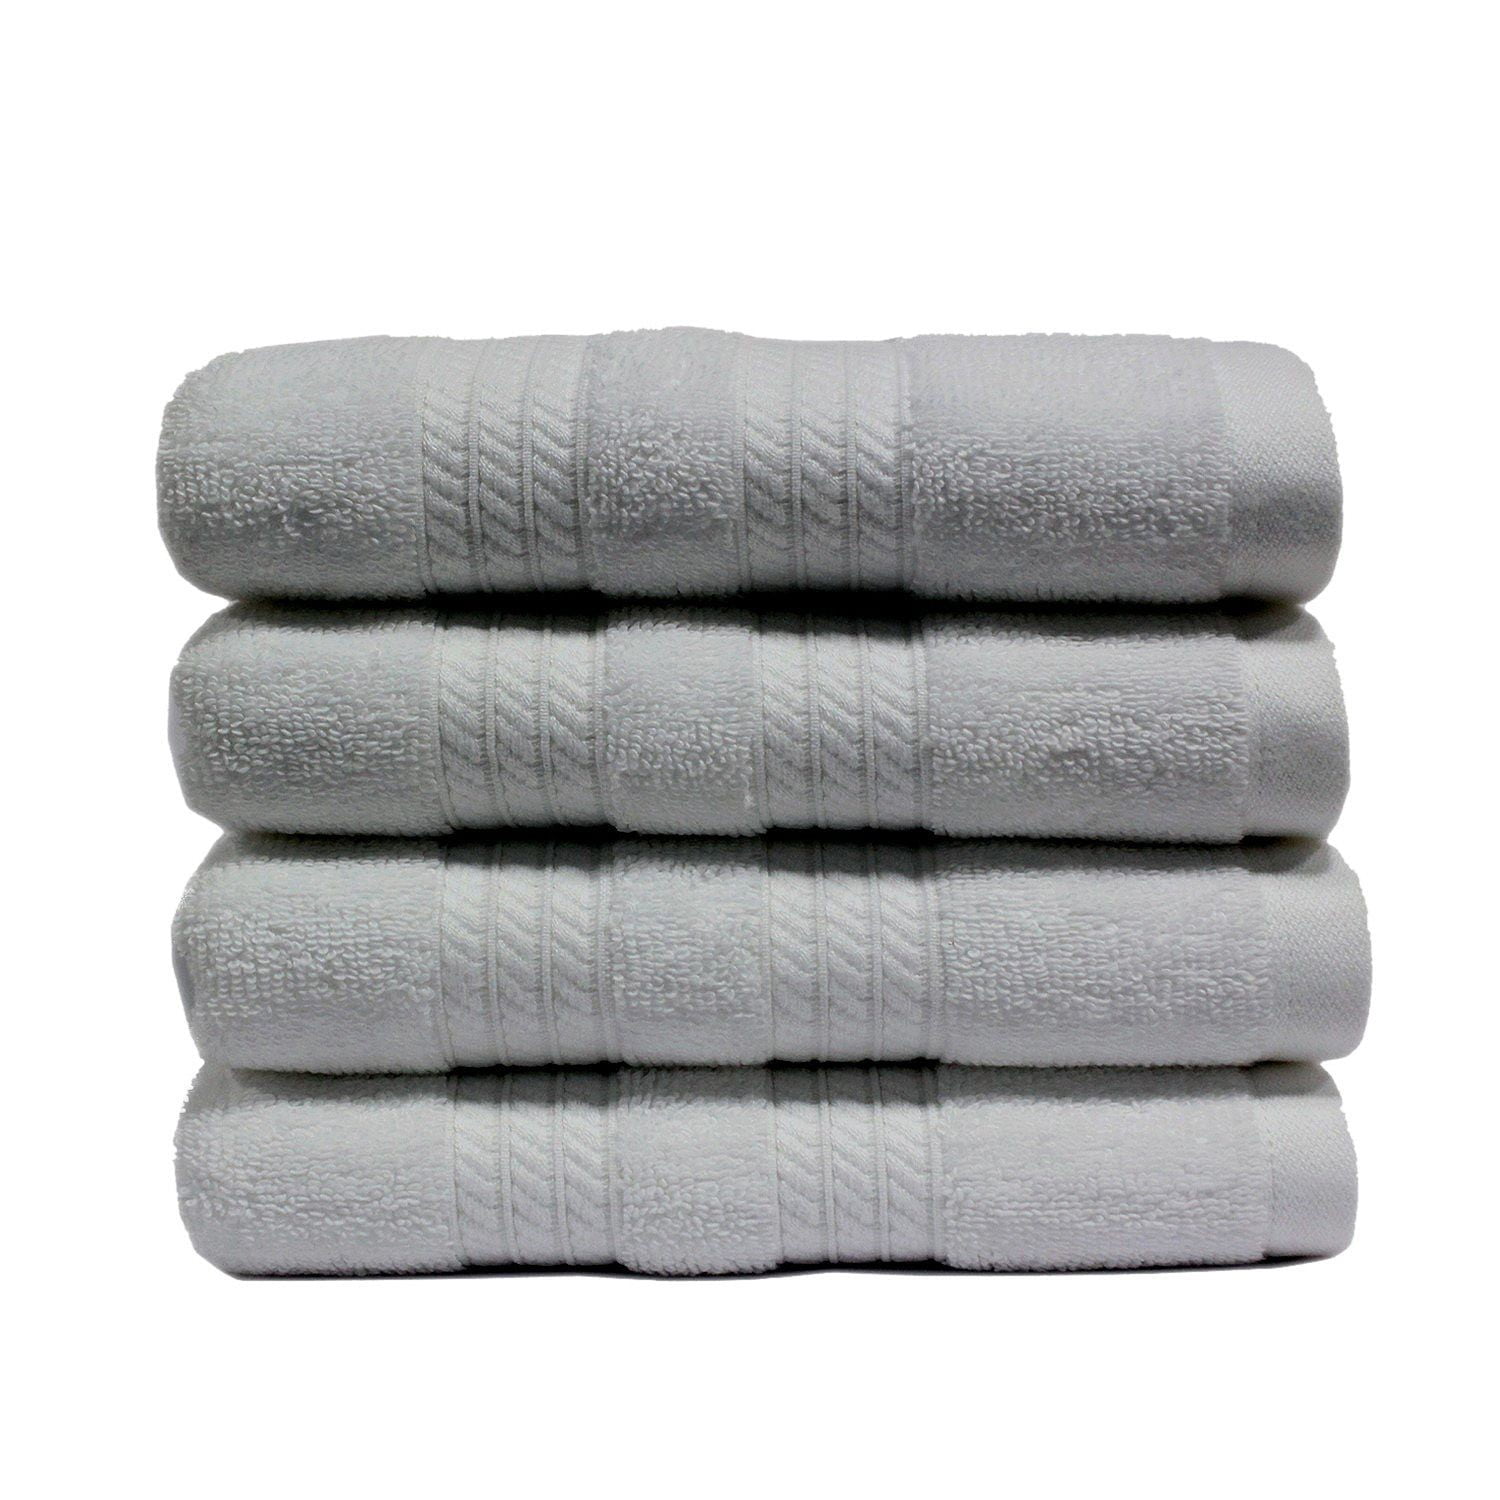 2 pack Details about   Hotel Premier Collection 100% Cotton Luxury Hand Towel by Member's Mark 